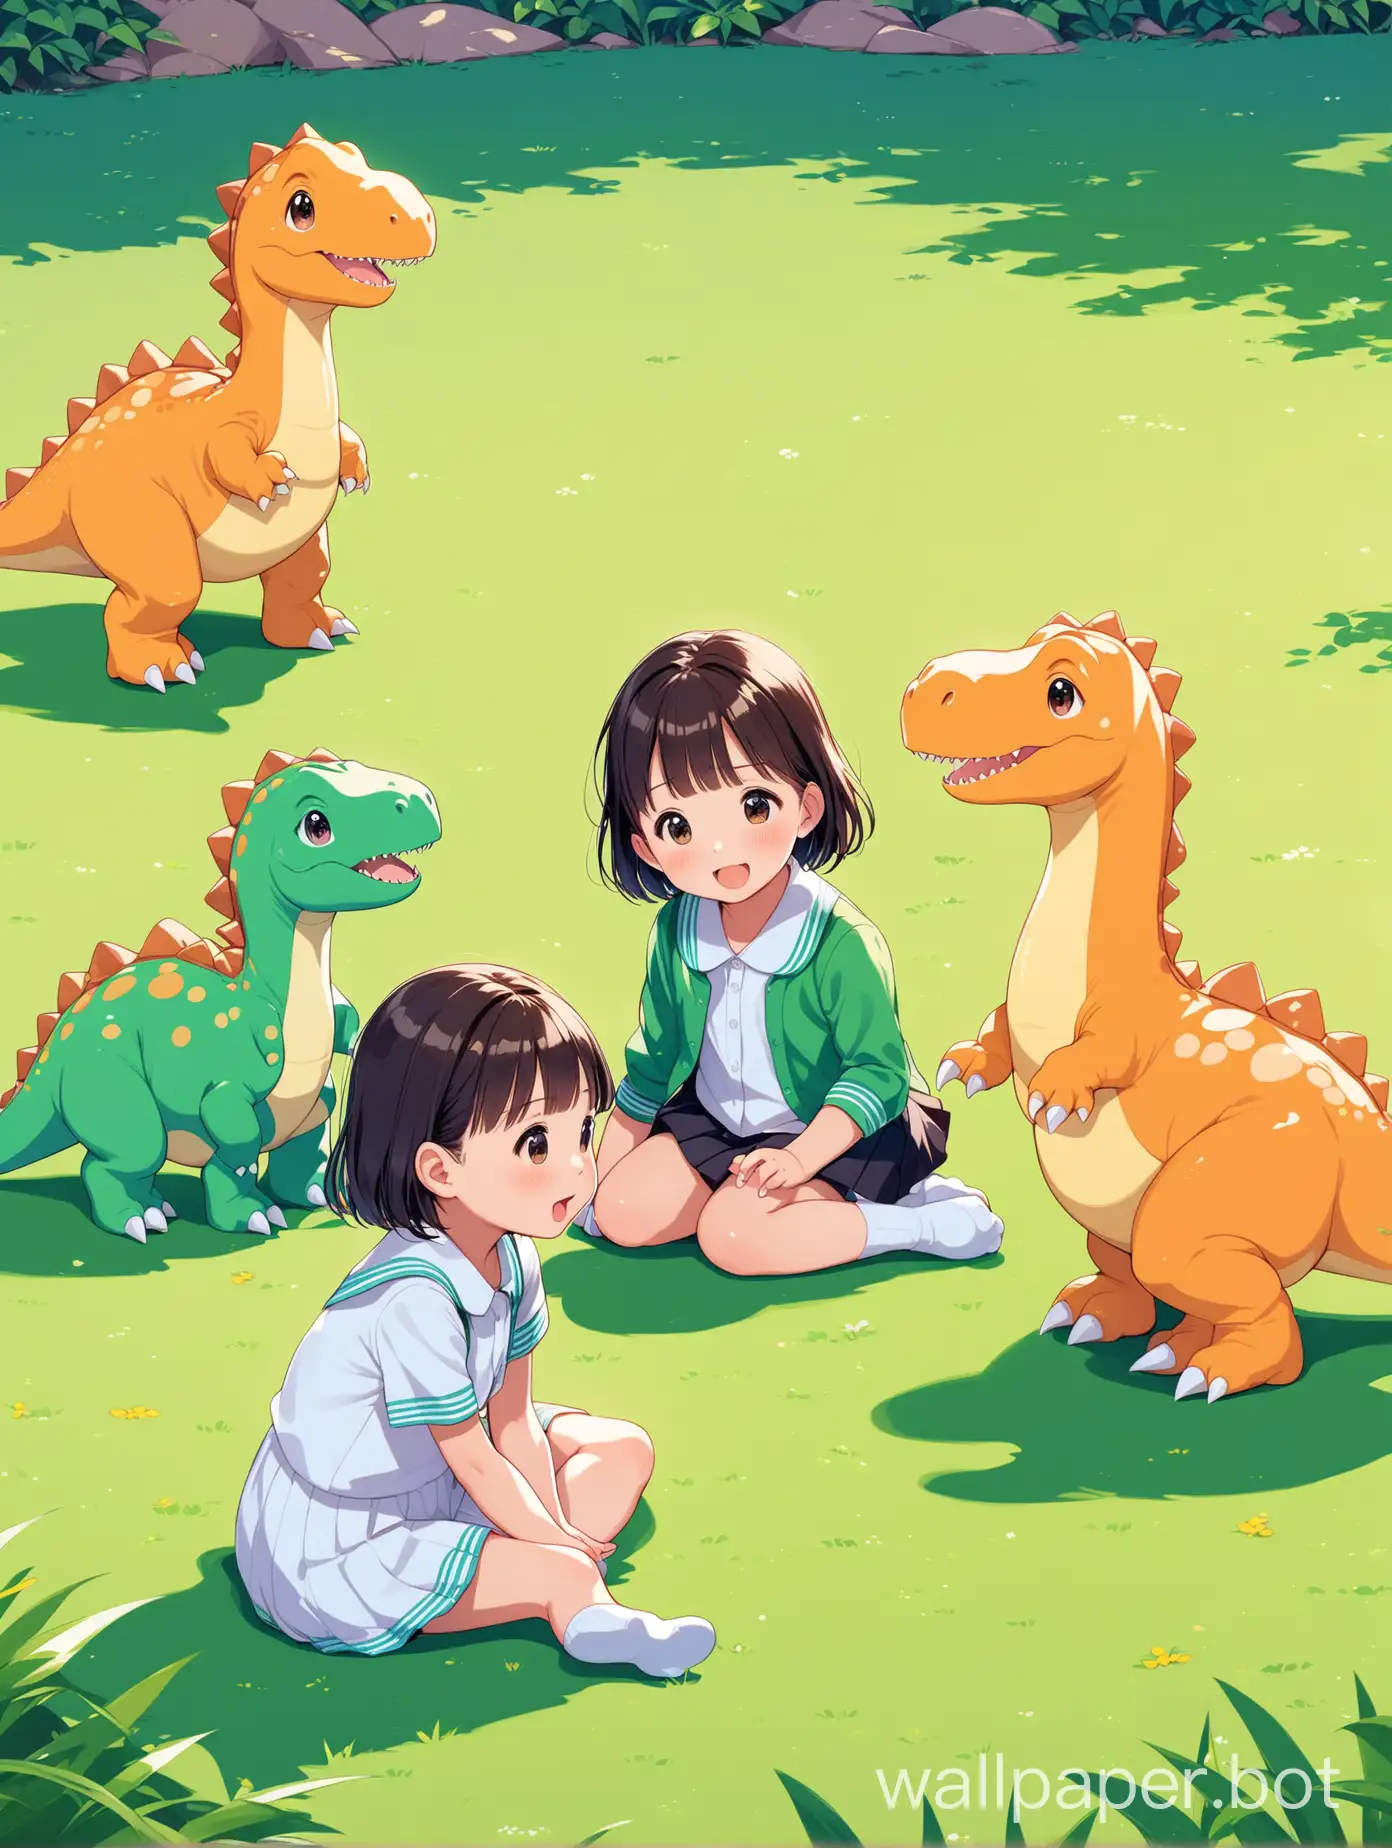 3 cute schoolchildren and 2 baby dinosaurs chatting on the grass